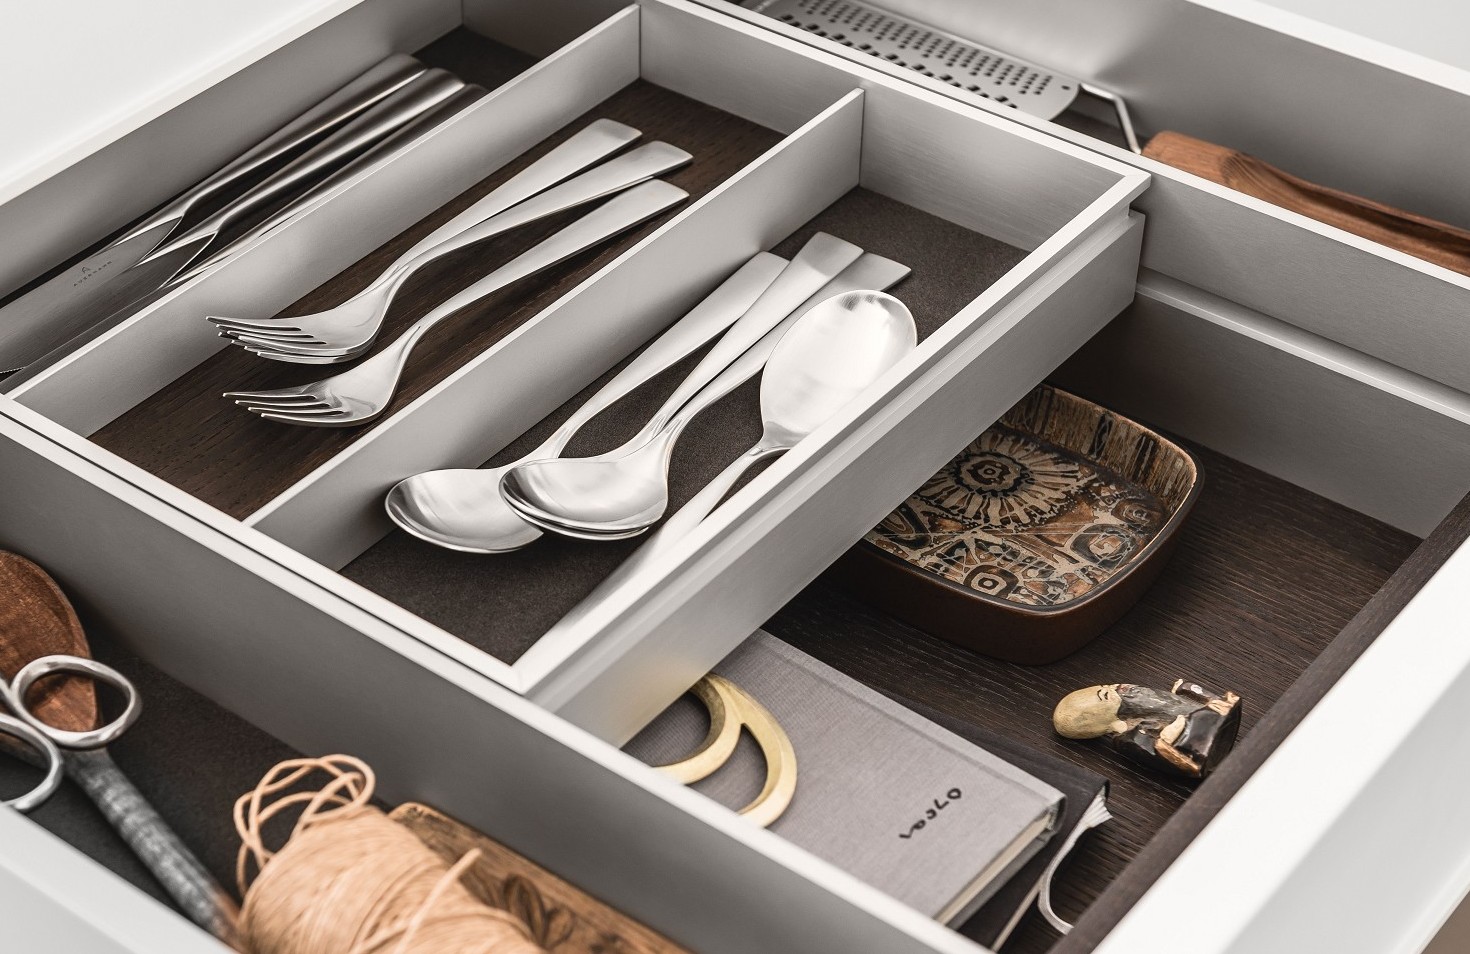 A bi-level drawer elegantly doubles storage space in SieMatic kitchen drawers